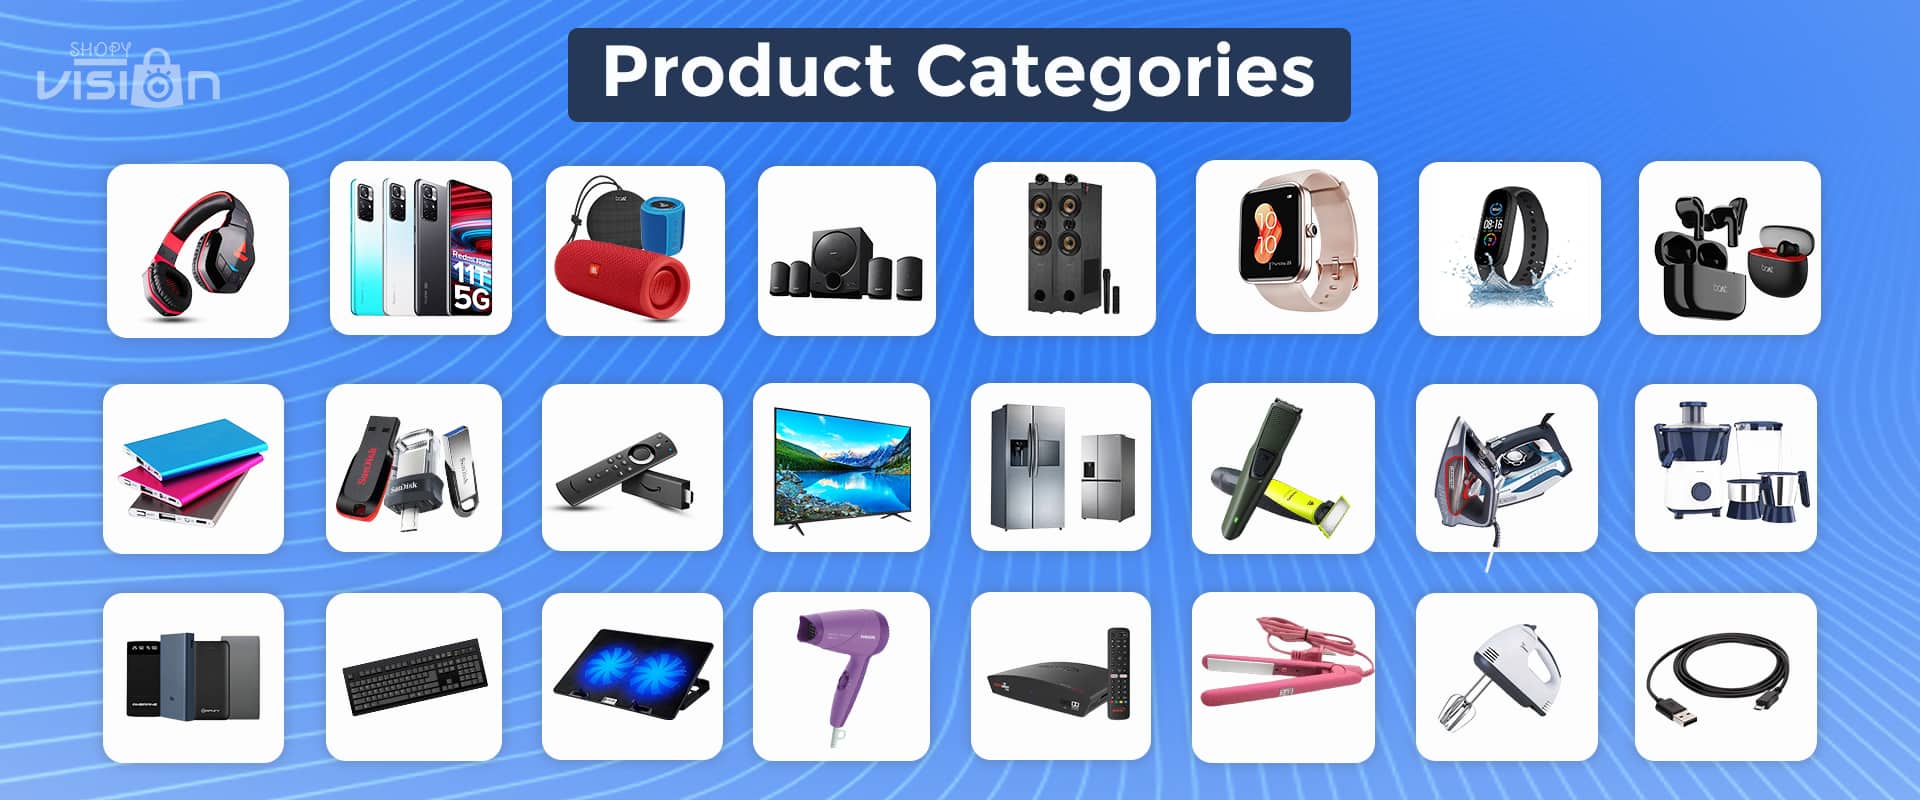 Shopyvision Product Categories